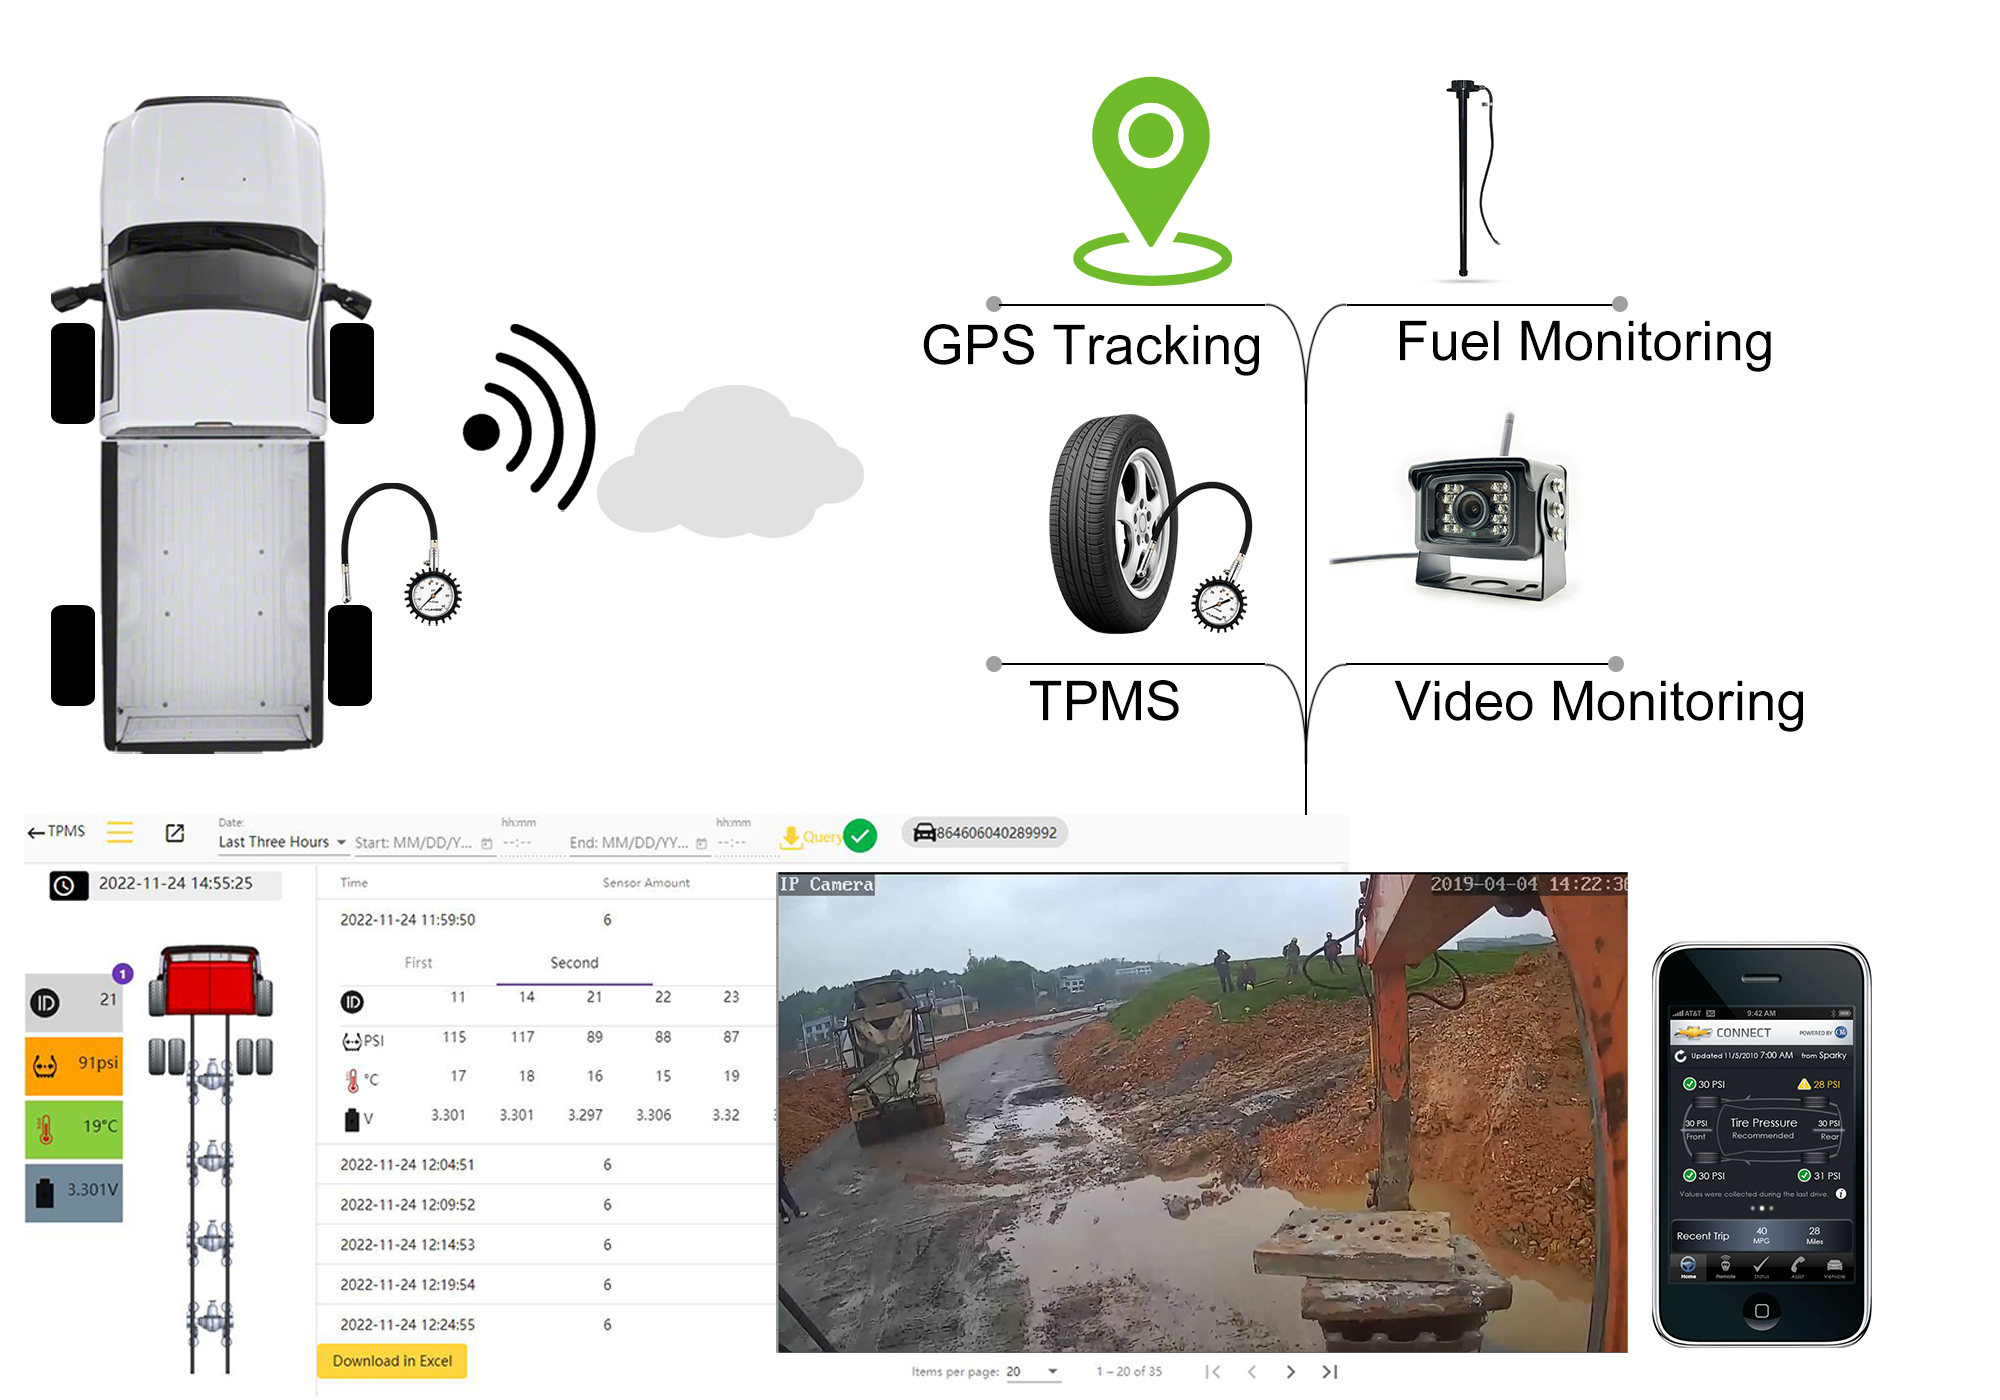 Complete solutions for gps tracking, fuel level monitoring, tire pressure monitoring and video monitoring all in one set